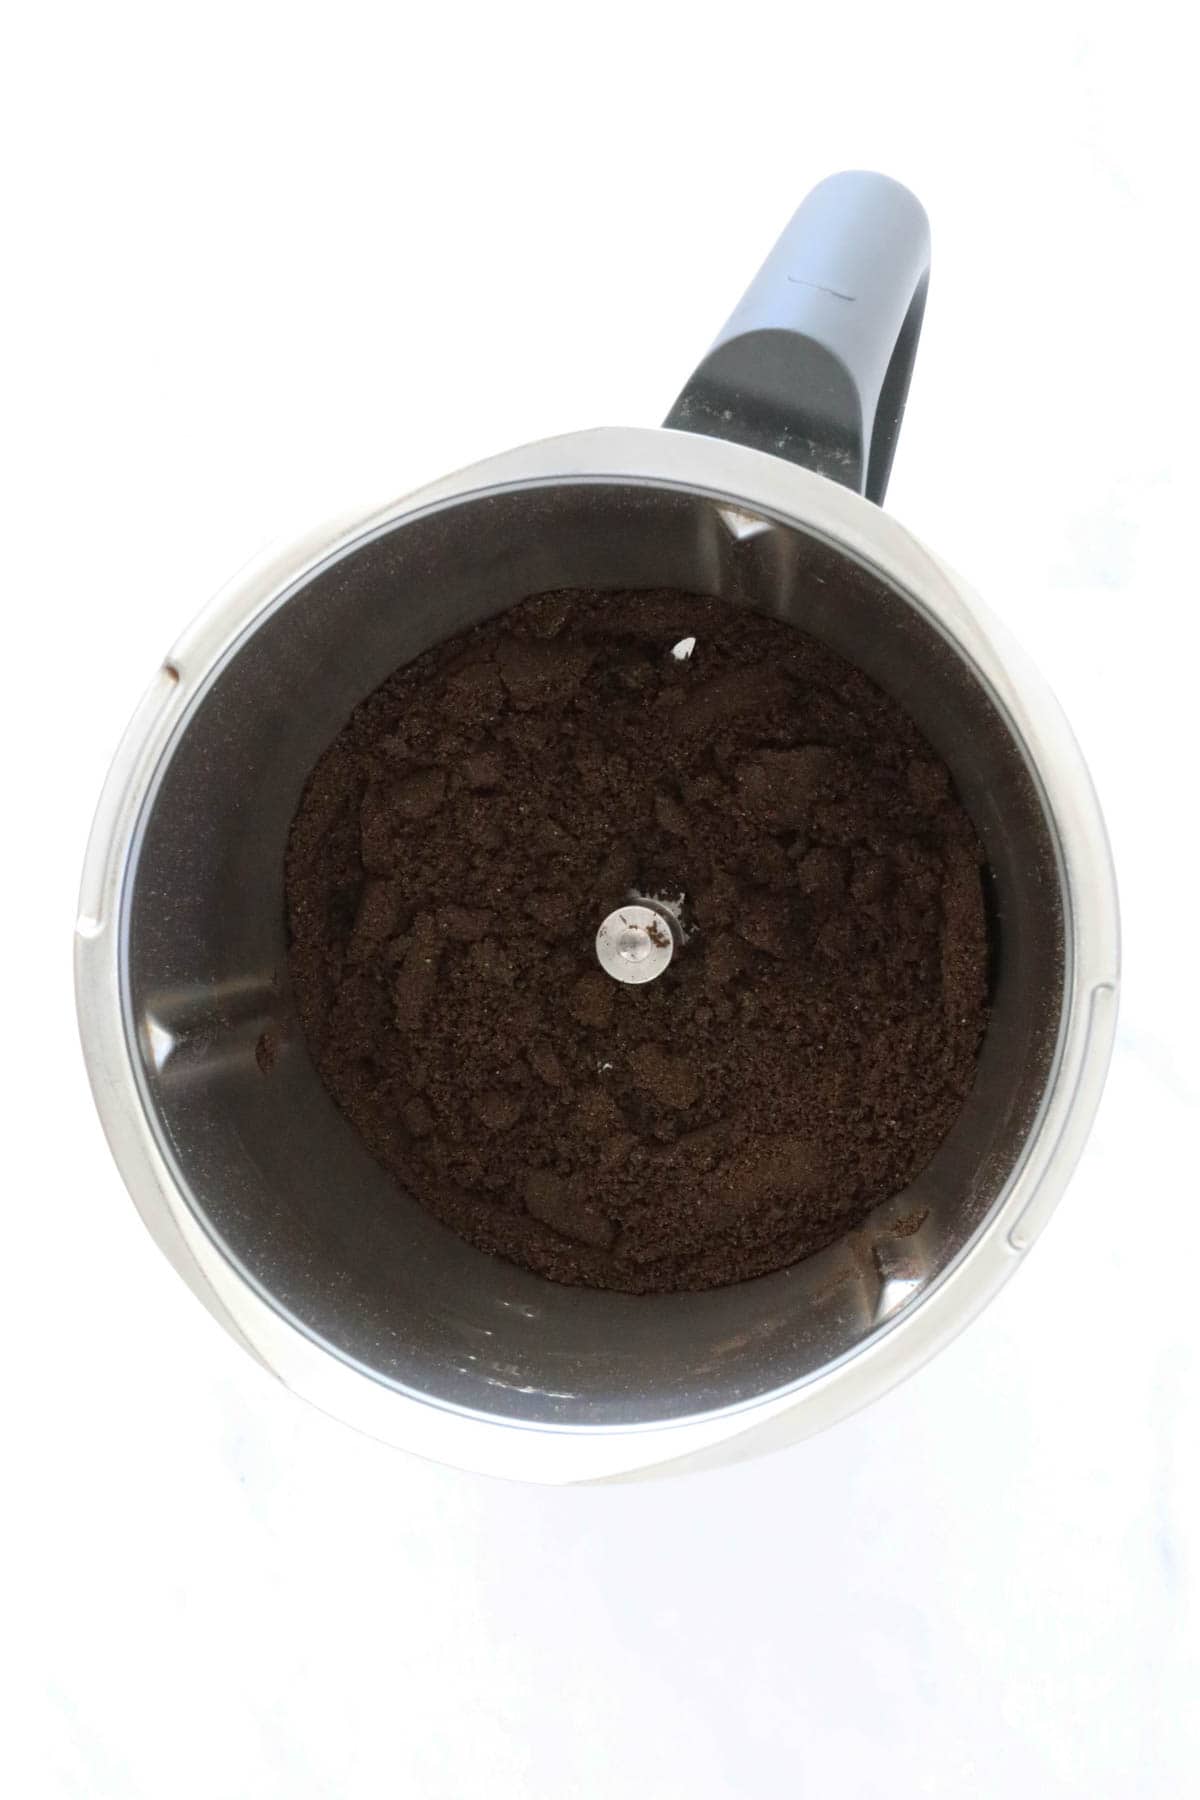 Crushed oreos in a Thermomix.